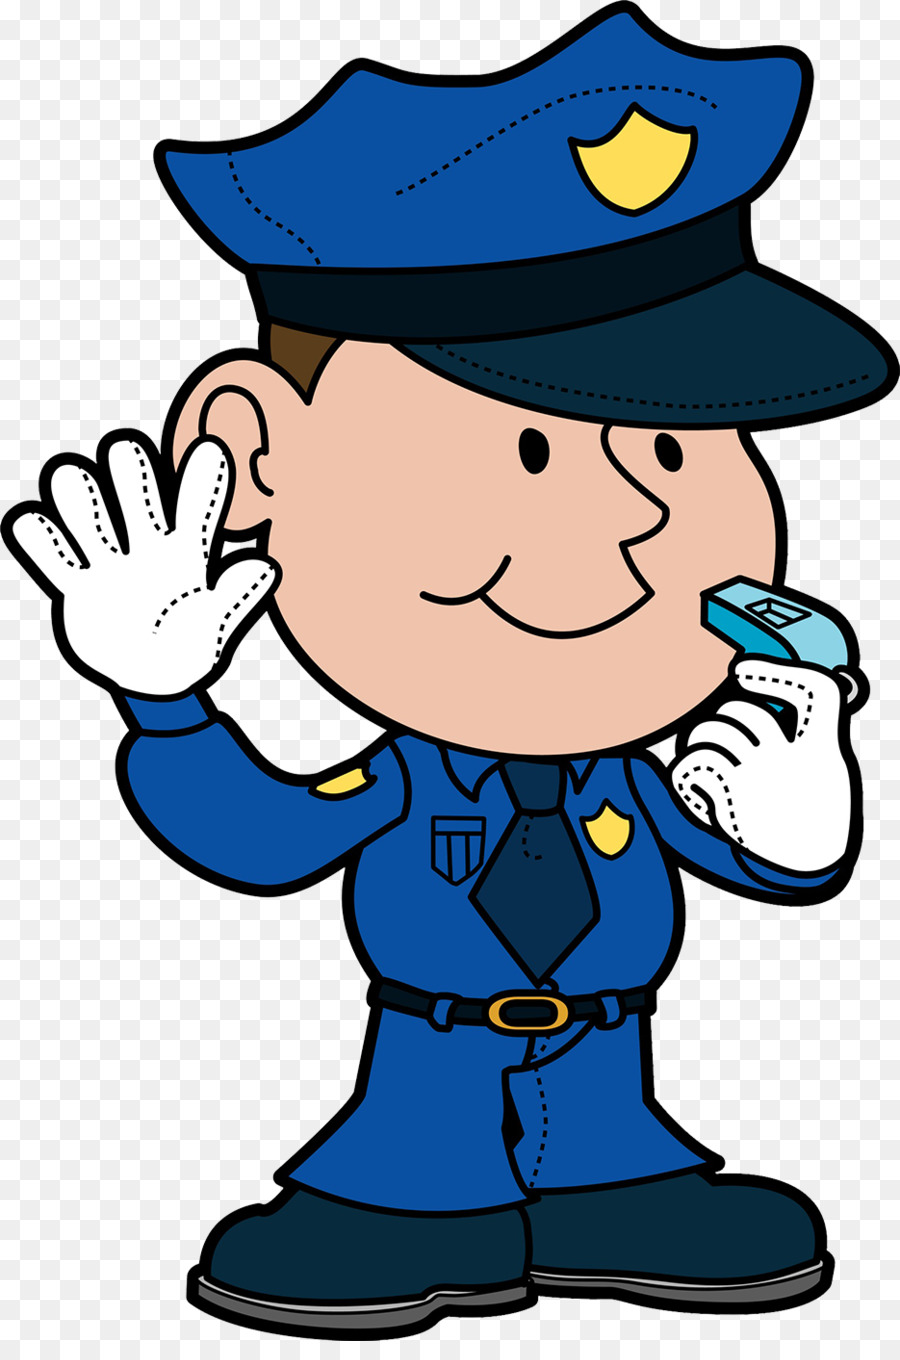 Police officer Free content Clip art - The traffic policeman in blue